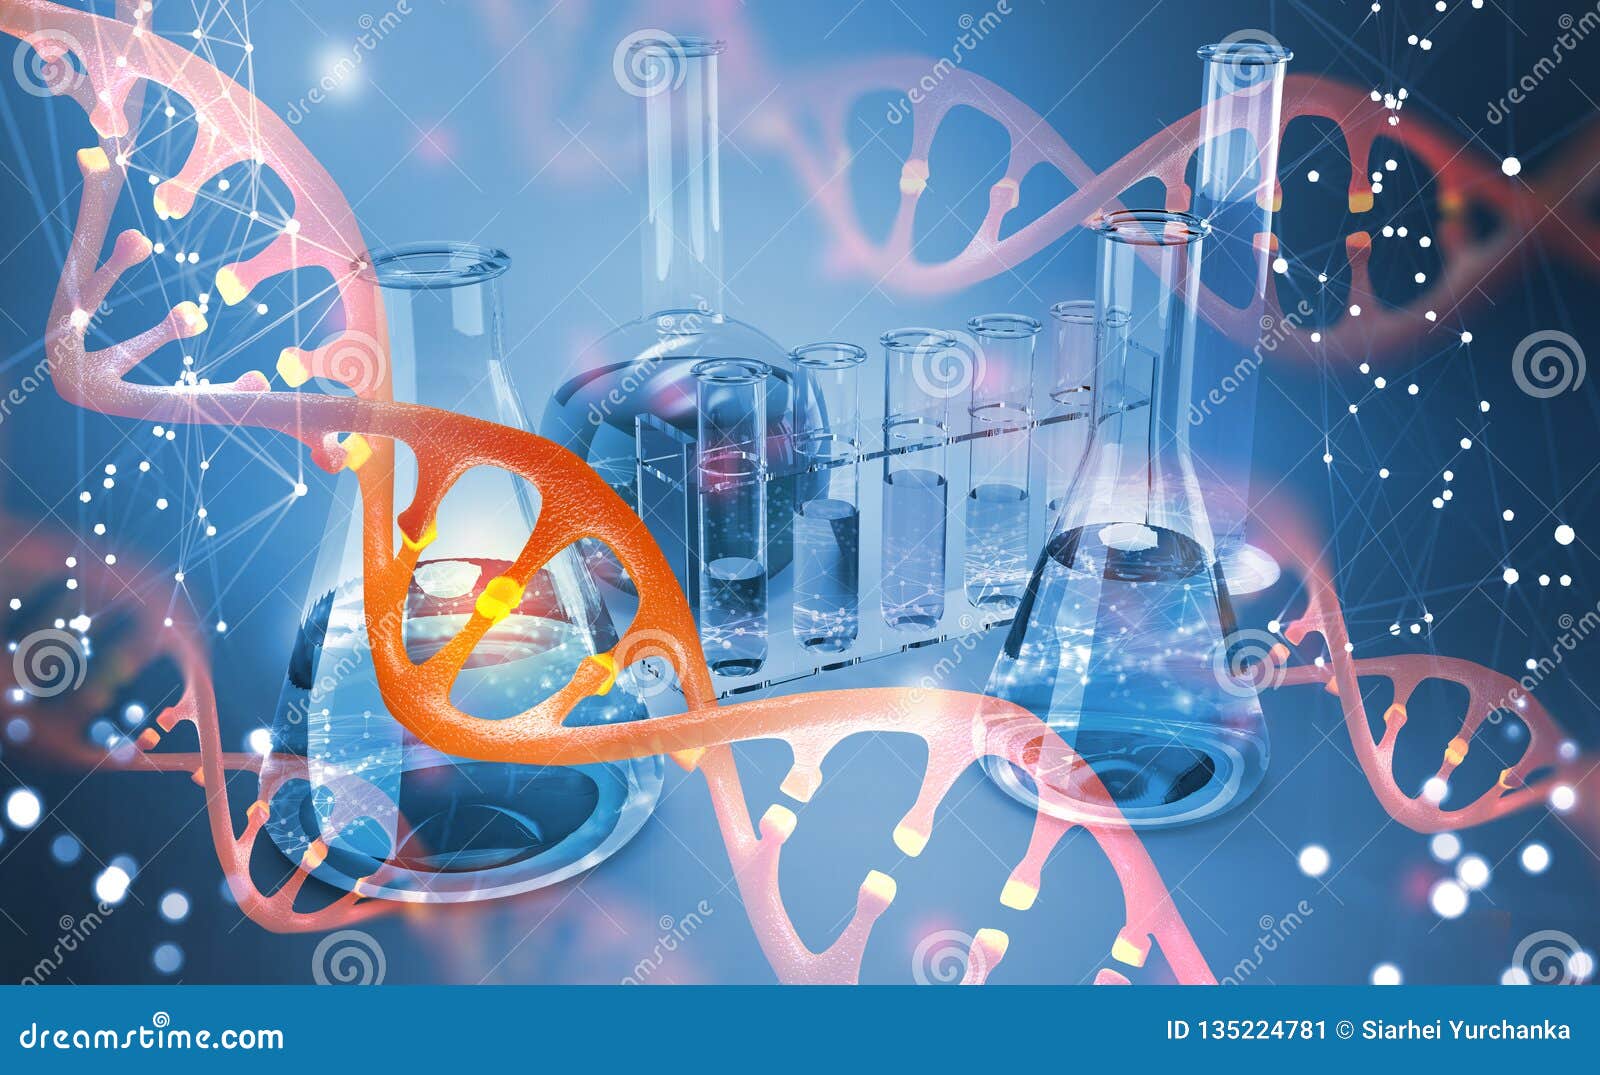 dna. microbiology. scientific laboratory. studies of the human genome